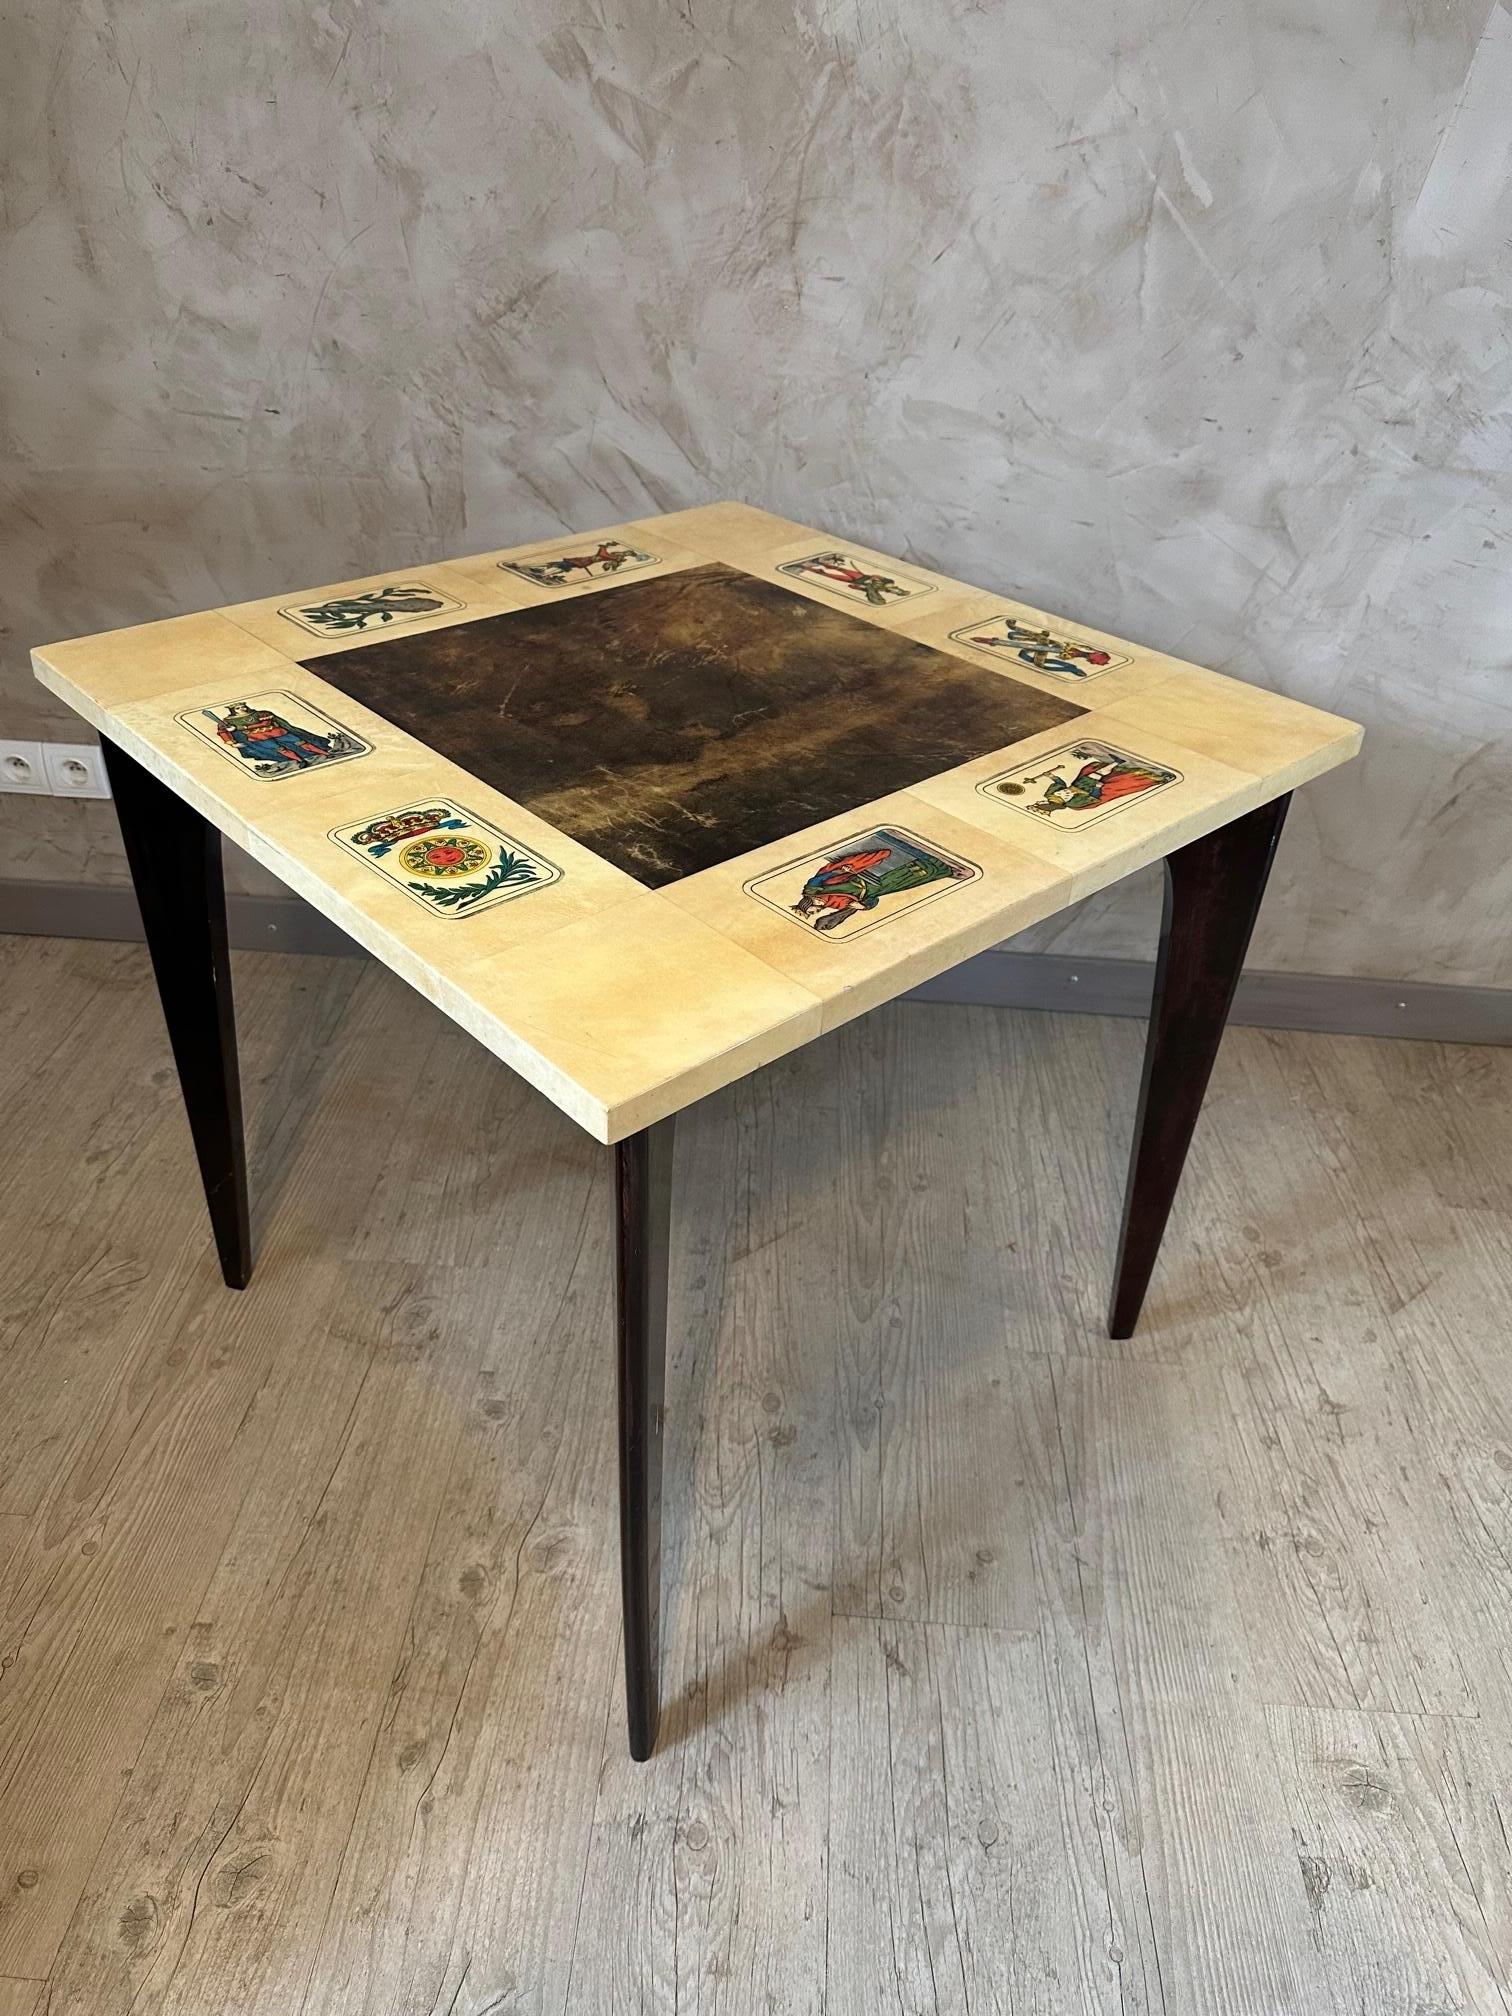 20th century Aldo Tura Lacquered Goatskin and Walnut Table With Chairs, 1960s For Sale 10